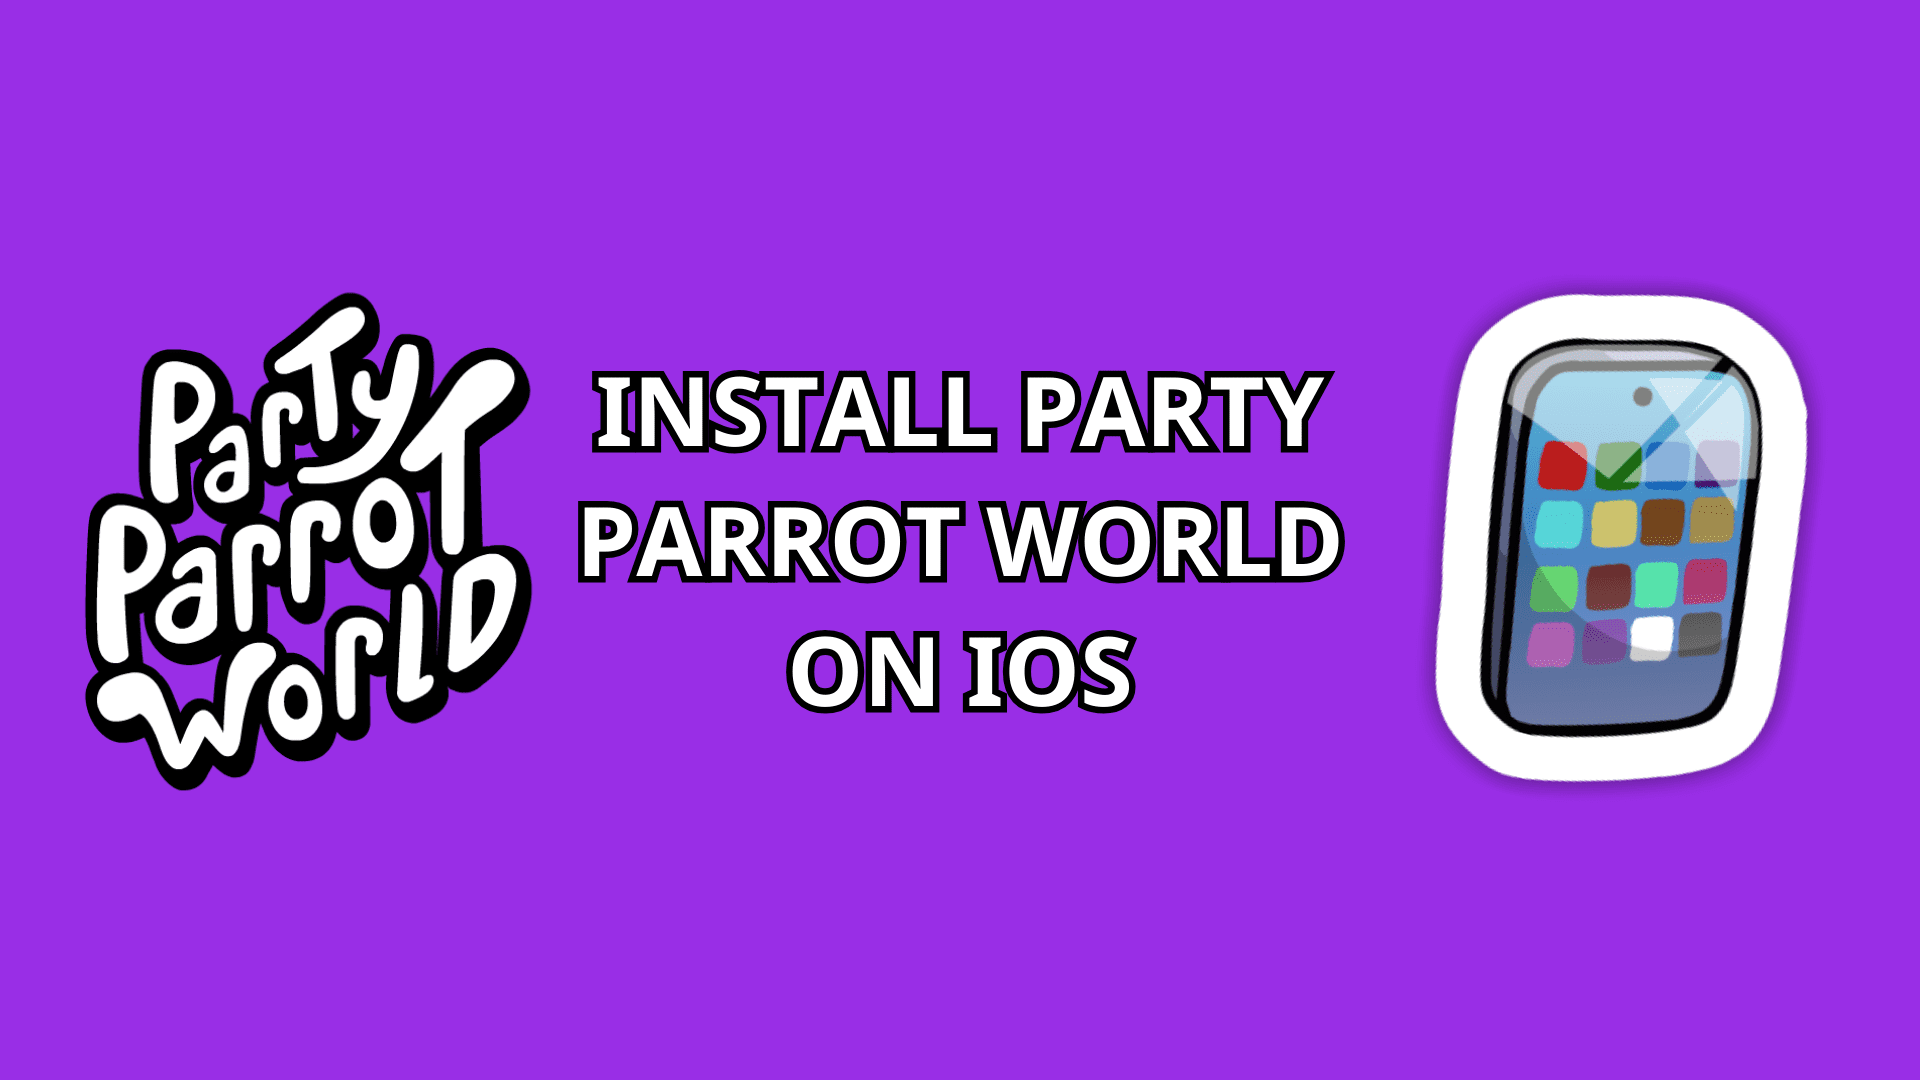 Install Party Parrot World on iOS text with Party Parrot World logo and silver smartphone icon